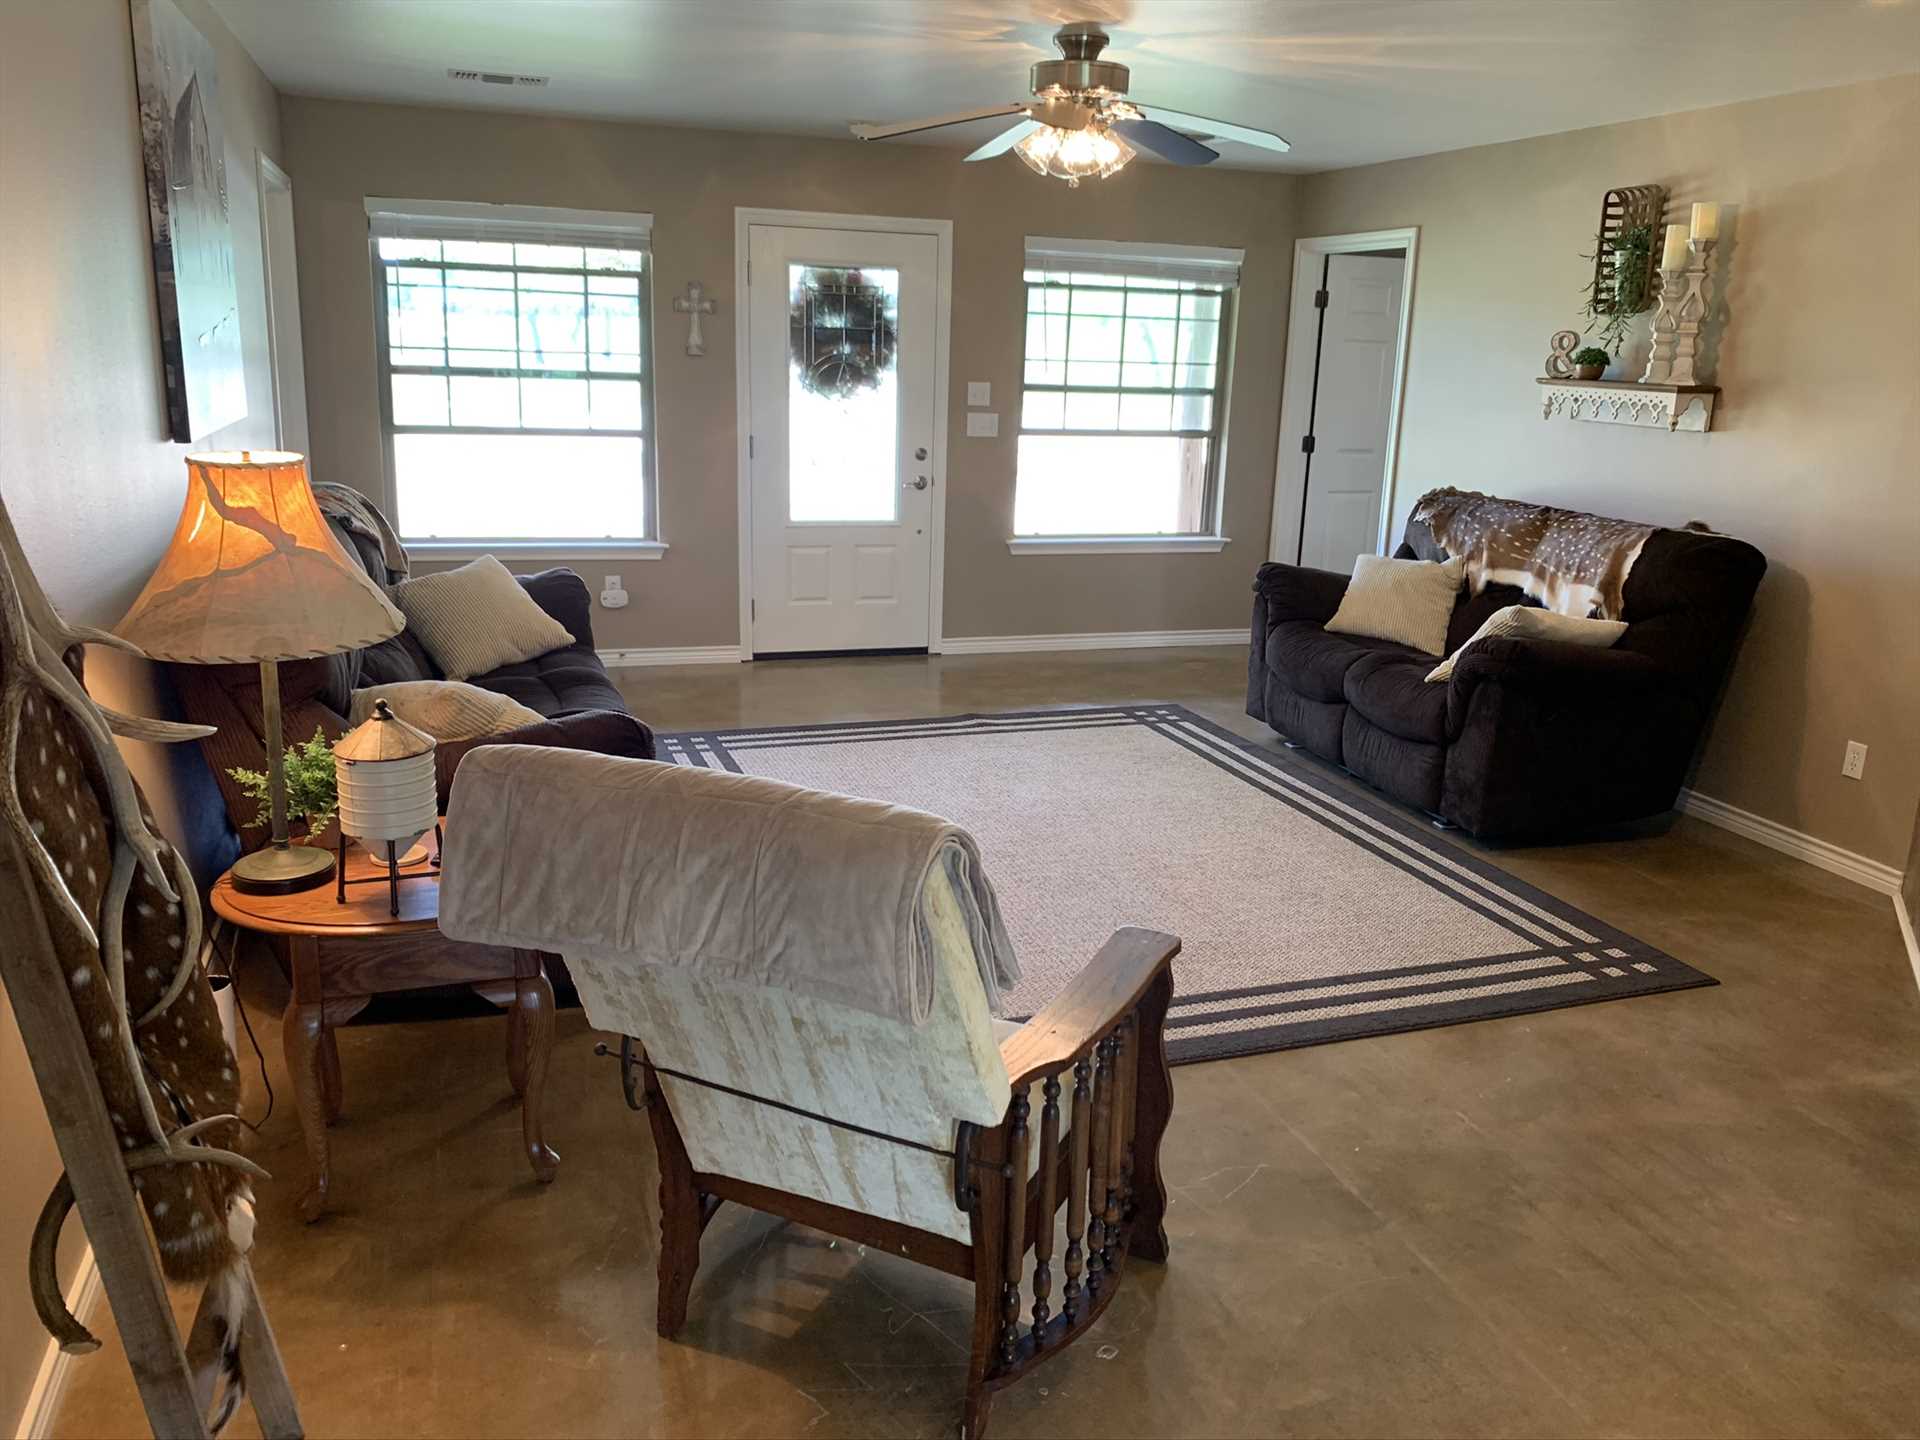                                                 Multiple recliners, a gas fireplace, a TV with DVD player and Roku, board games, and Wifi assures the huge living space has something for everyone!